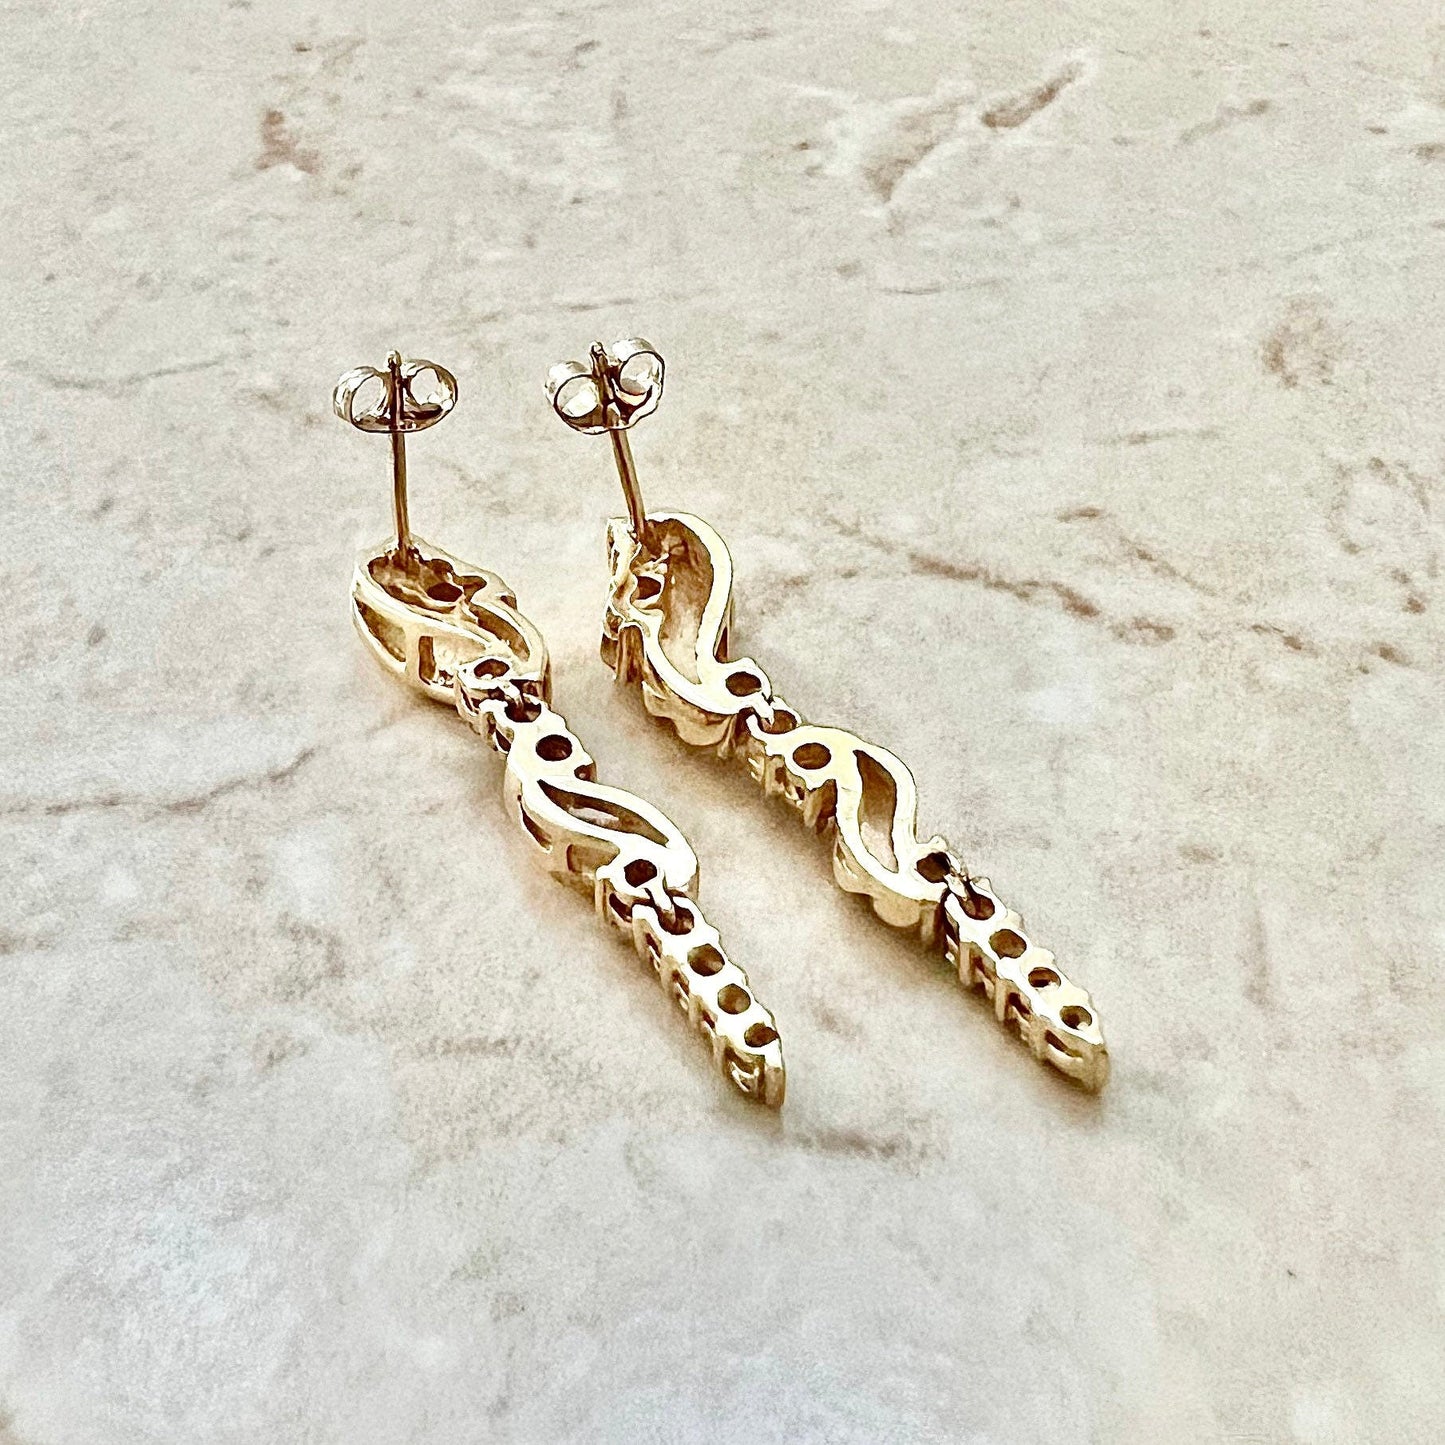 Vintage 14K Diamond Drop Earrings - Yellow Gold Dangling Earrings - Diamond Earrings - Best Gifts For Her - Anniversary Gift - Gifts For Mom